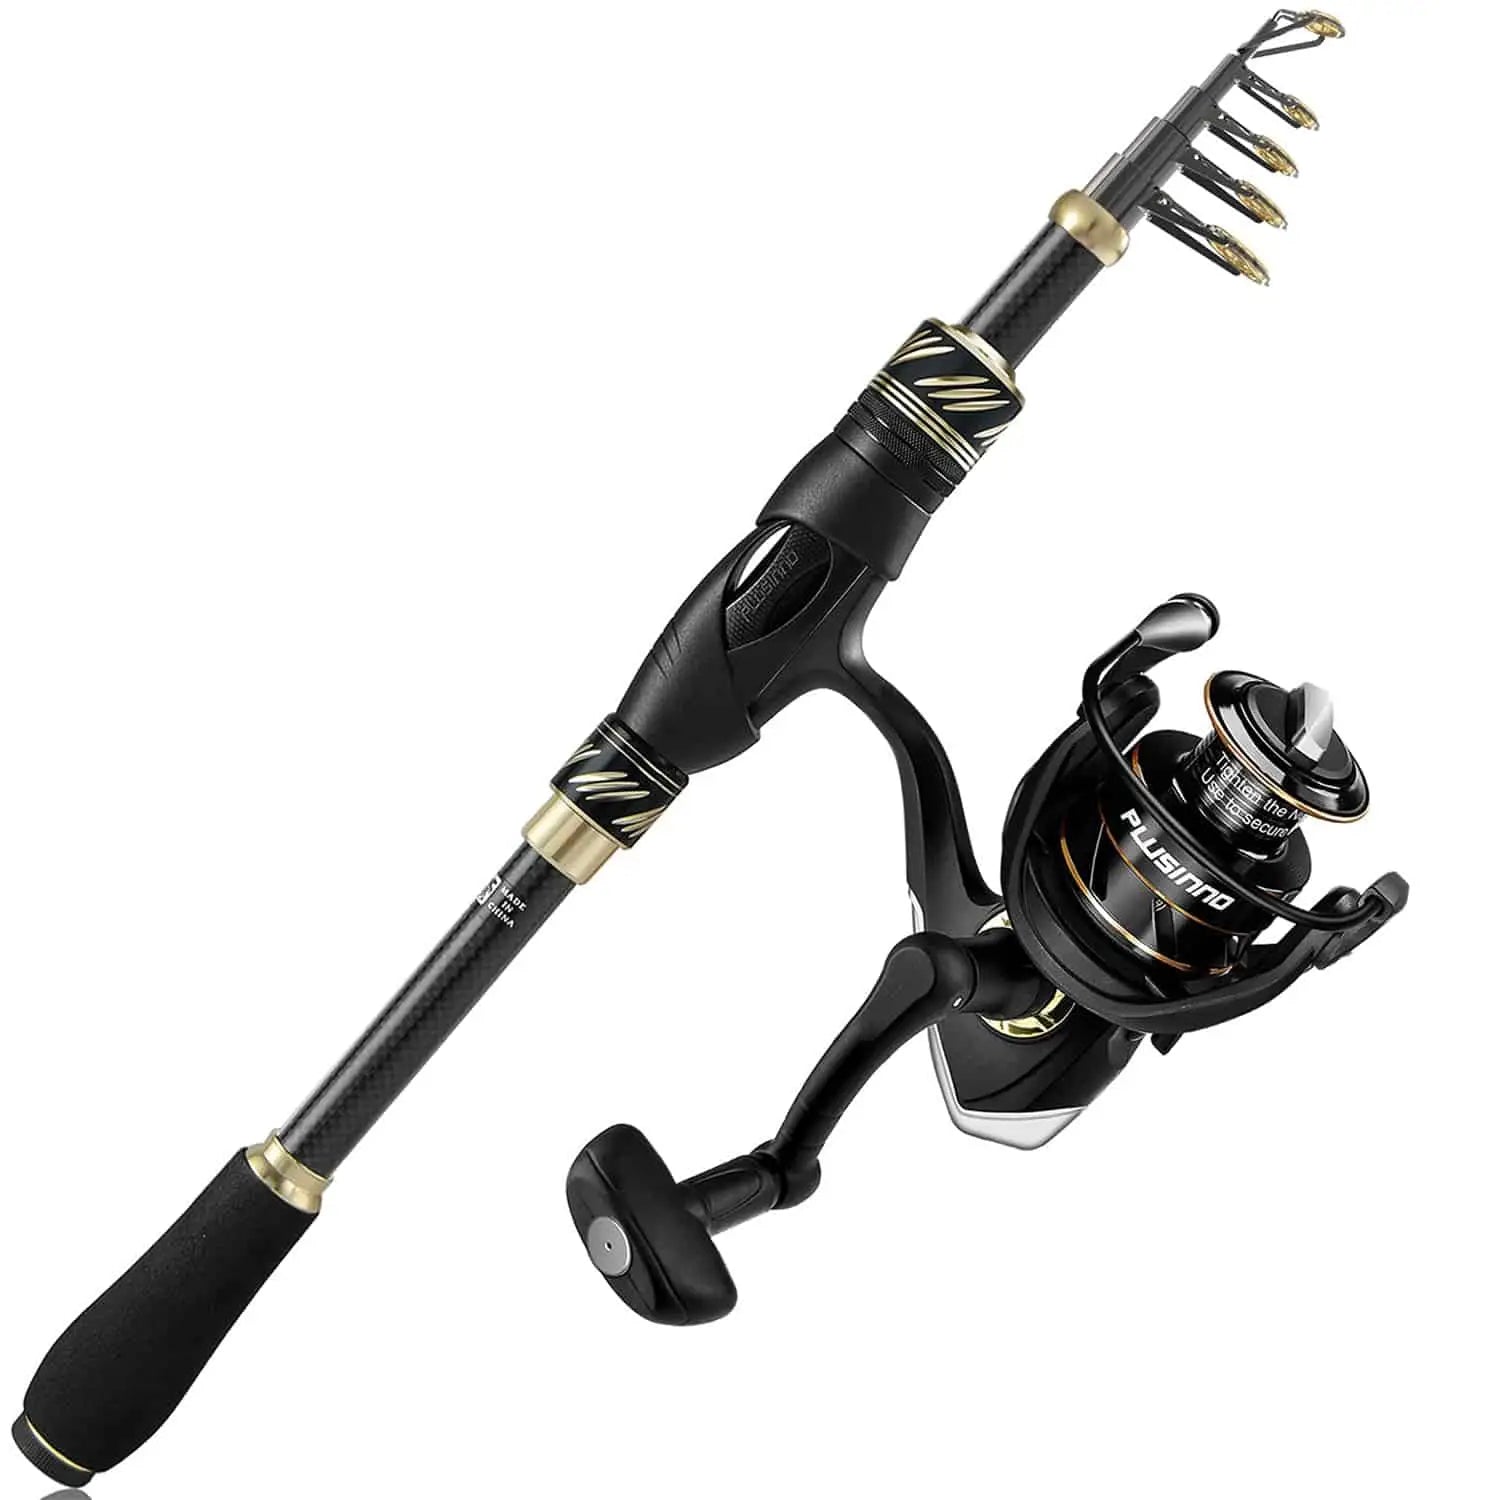 Fishing Pole Combo Set, Fishing Rod and Reel Combos Carbon Fiber Telescopic  Fishing Pole with Reel Combo Sea Saltwater Freshwater Kit Fishing Rod Kit,  Rod & Reel Combos -  Canada